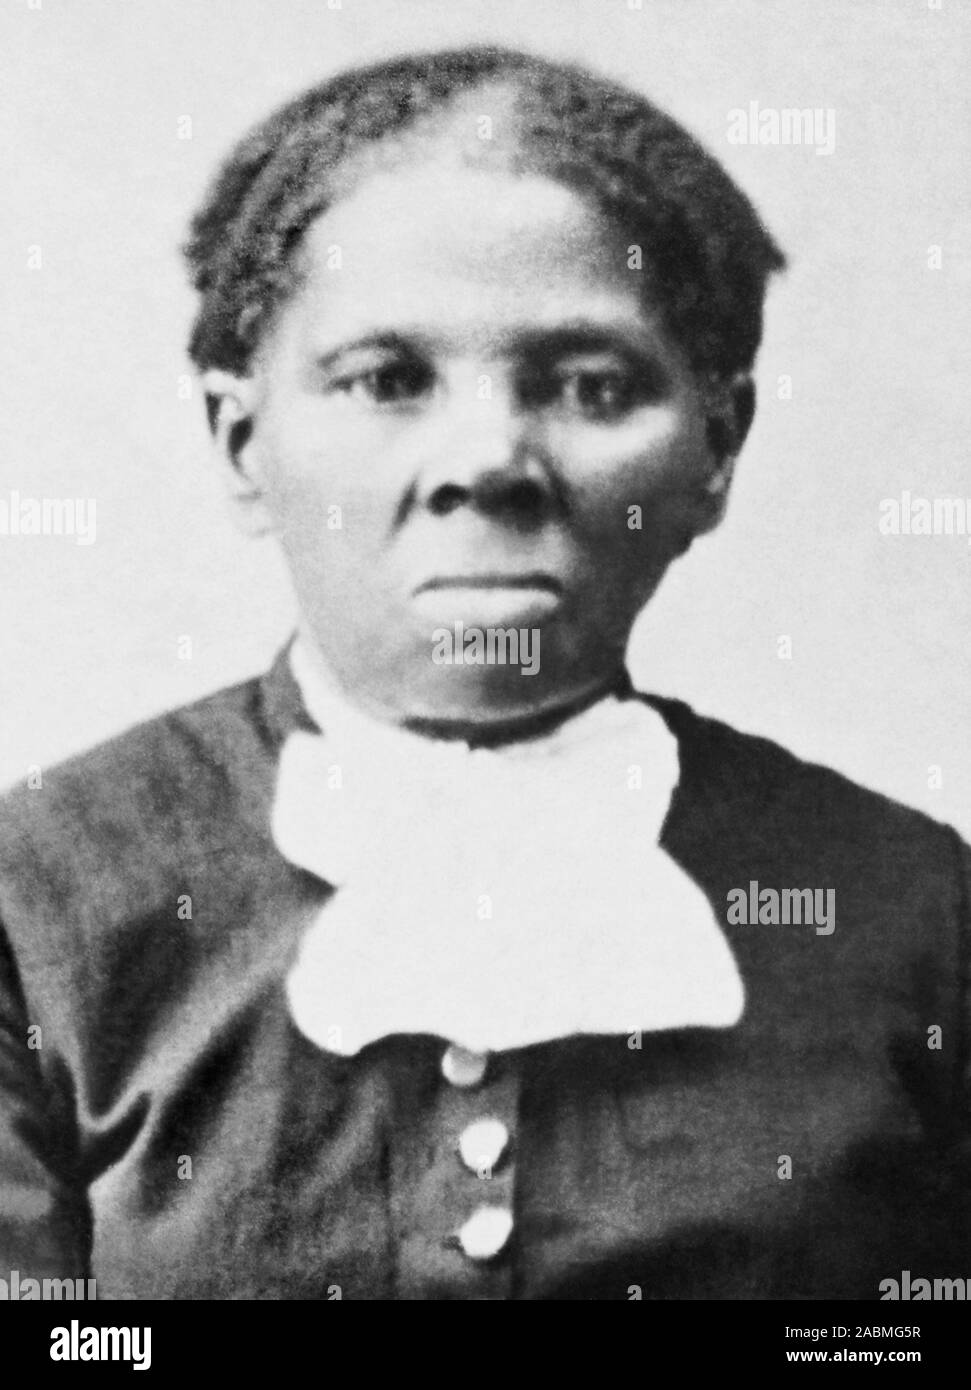 Vintage portrait photo of Harriet Tubman (c1820 – 1913). Born into slavery, Tubman (birth name Araminta Ross) escaped and later guided other slaves to freedom via the Underground Railroad before working as a nurse, spy and scout for the Union Army during the American Civil War. In later life she engaged in humanitarian work and promoted the cause of women’s suffrage. Photo circa 1875 by Harvey B Lindsley. Stock Photo